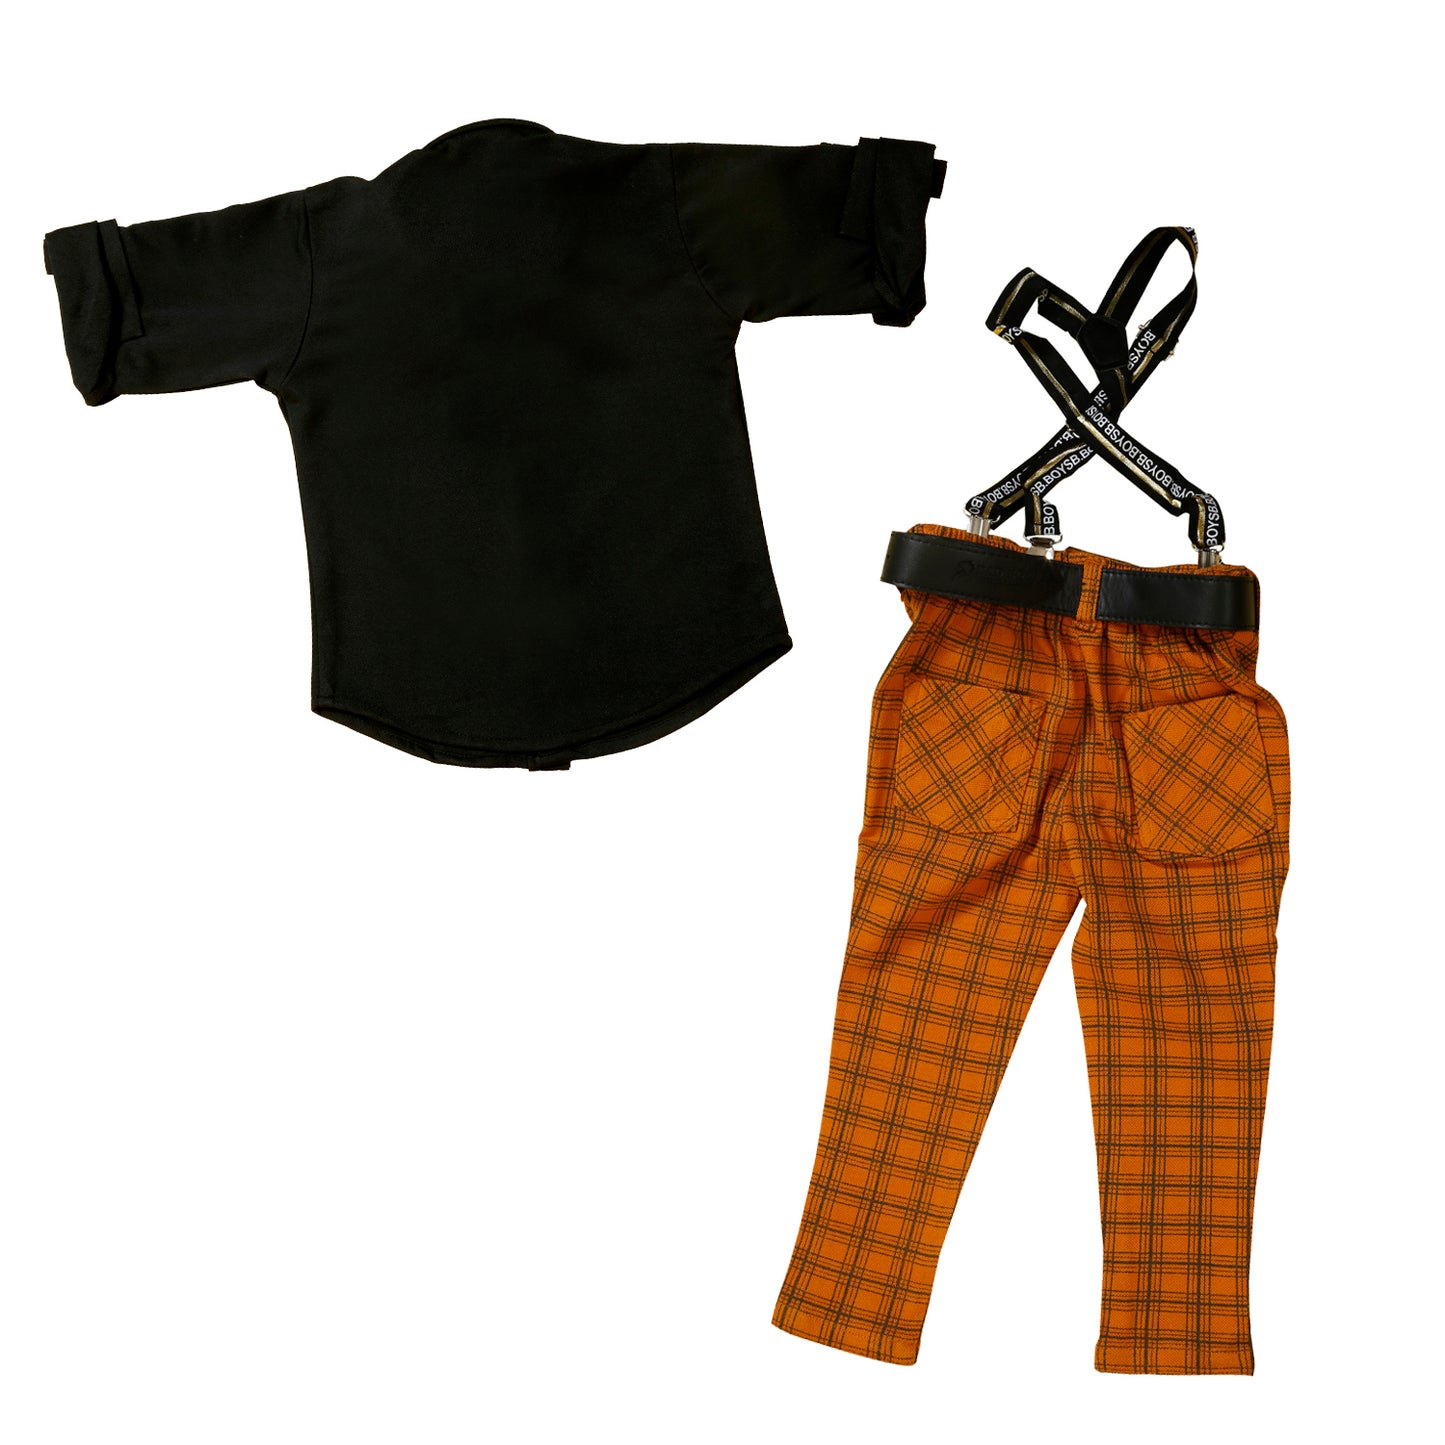 Plaid Party wear Outfit with Suspenders and wooden bow tie. - mashup boys